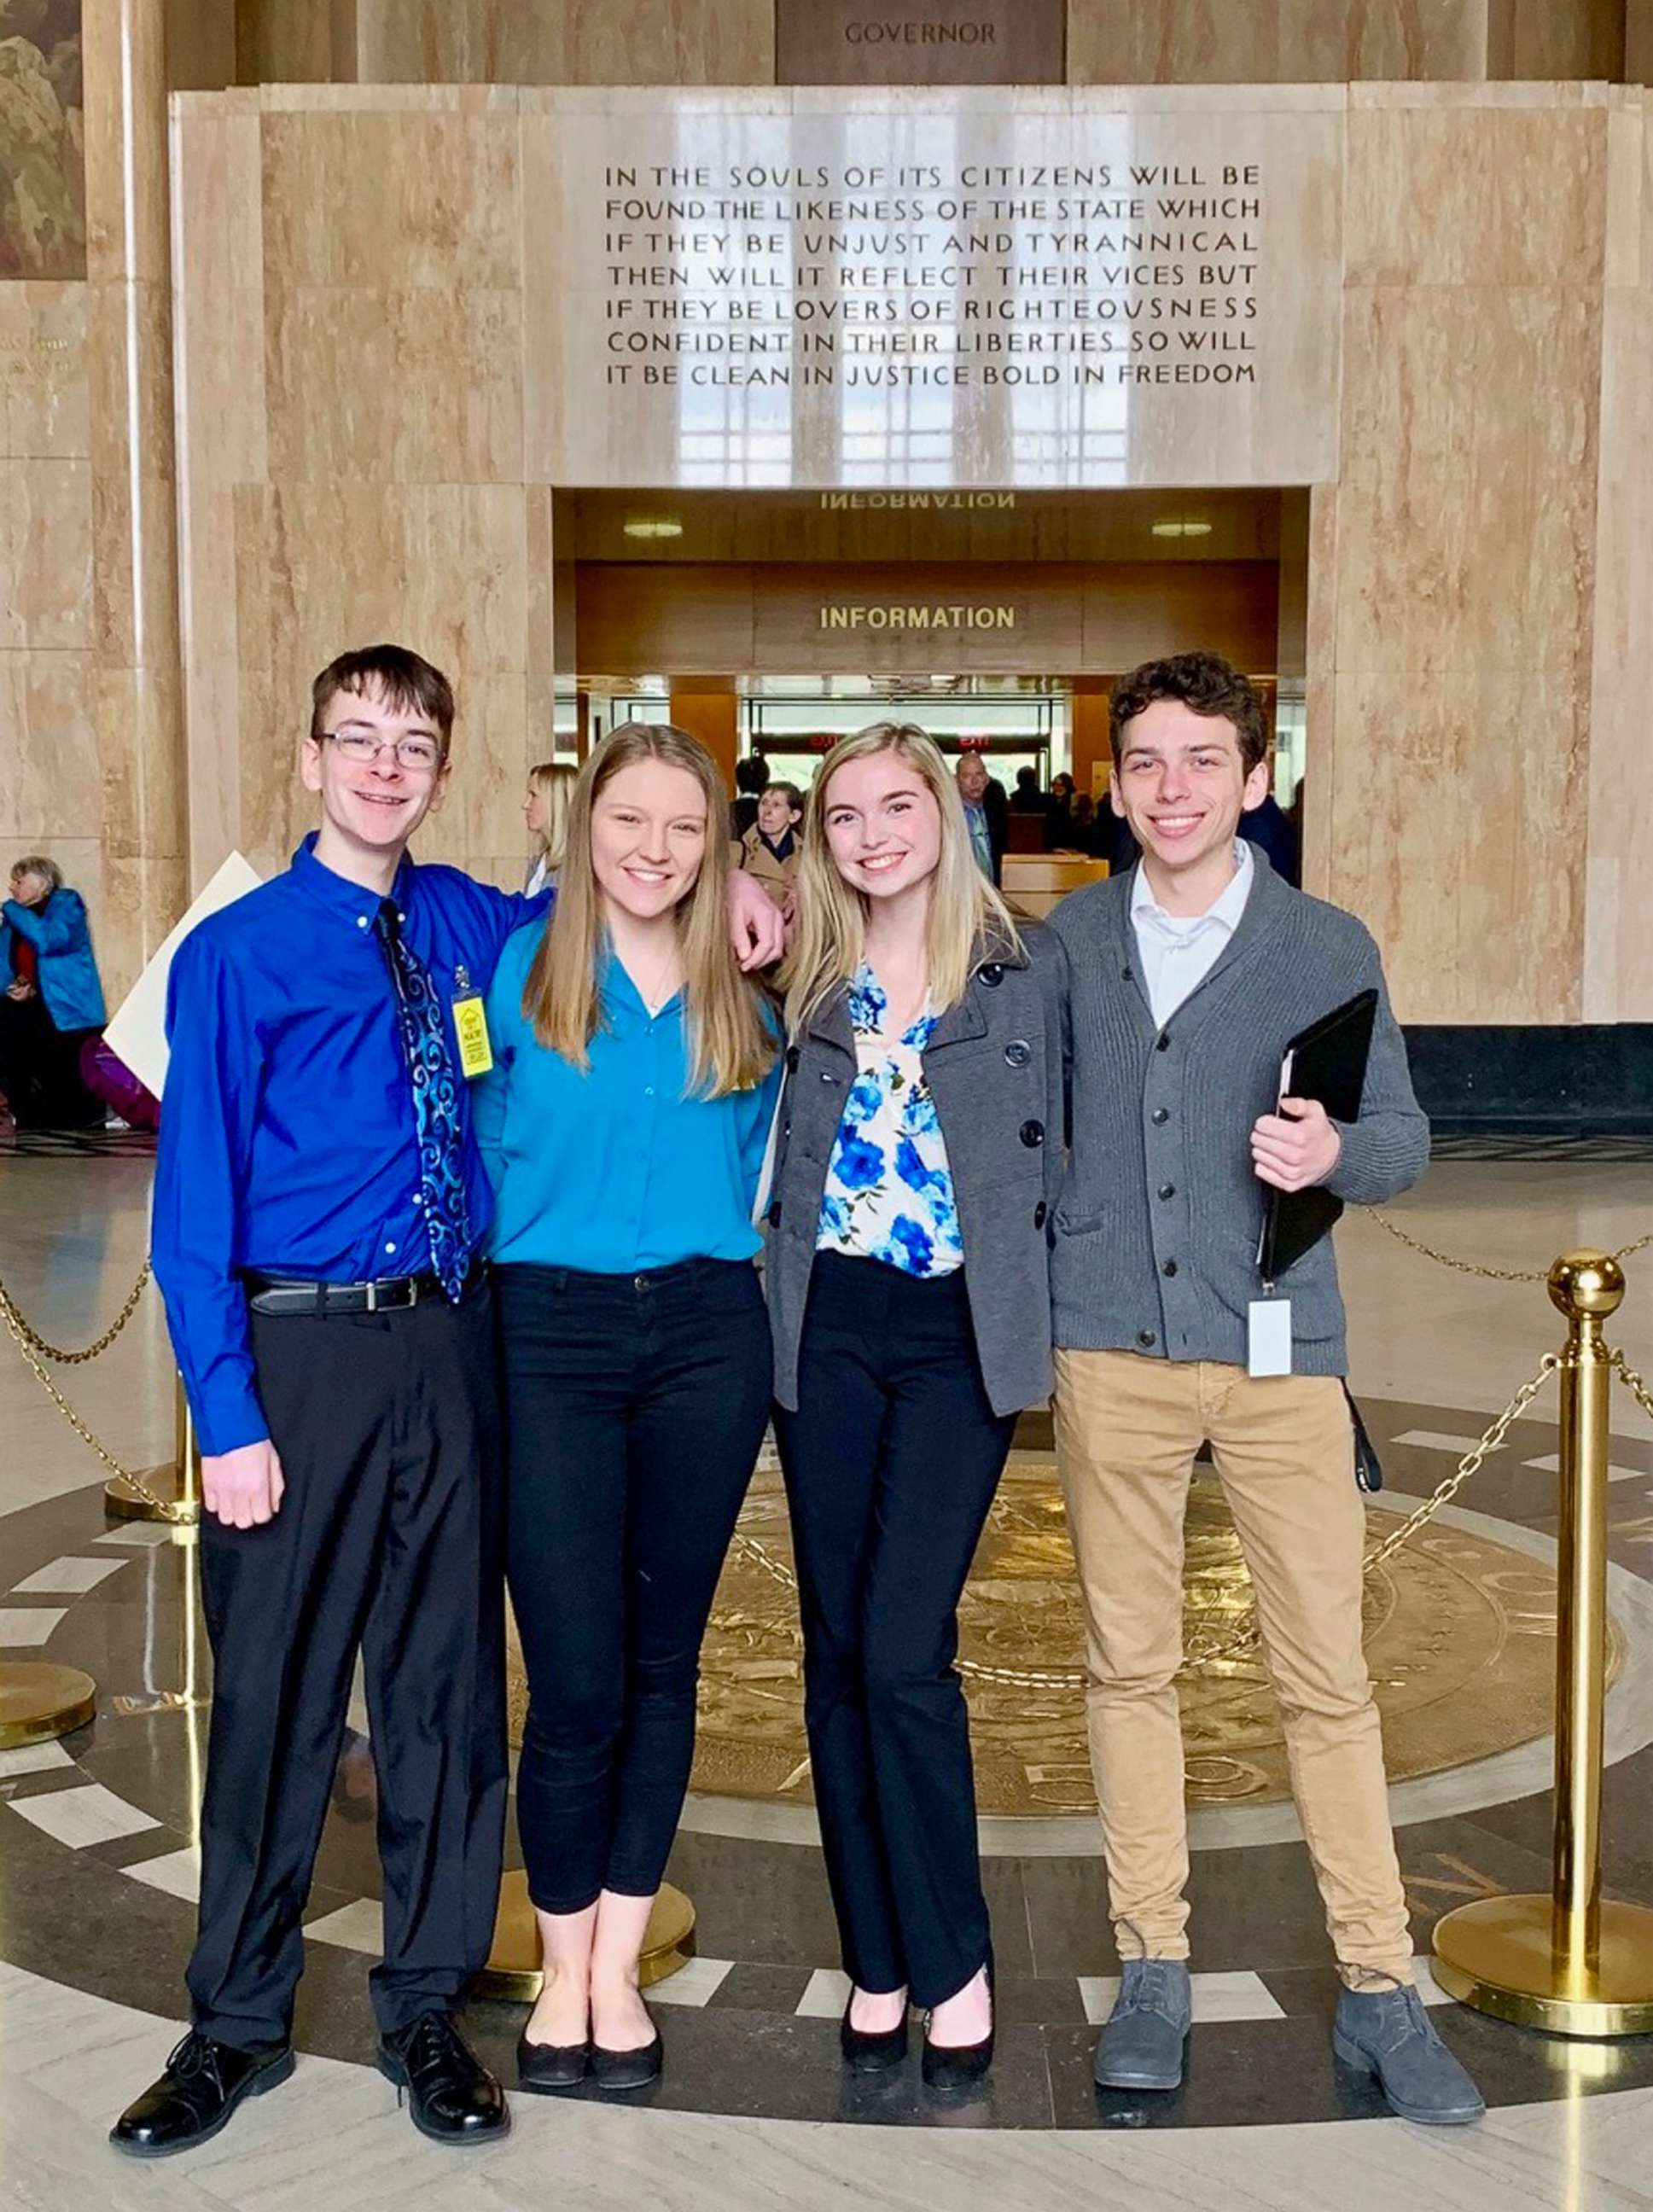 PHOTO: This Feb. 6, 2019, photo shows from left, Sam Adamson, Lori Riddle, Hailey Hardcastle, and Derek Evans at the Oregon State Capitol in Salem, Ore.